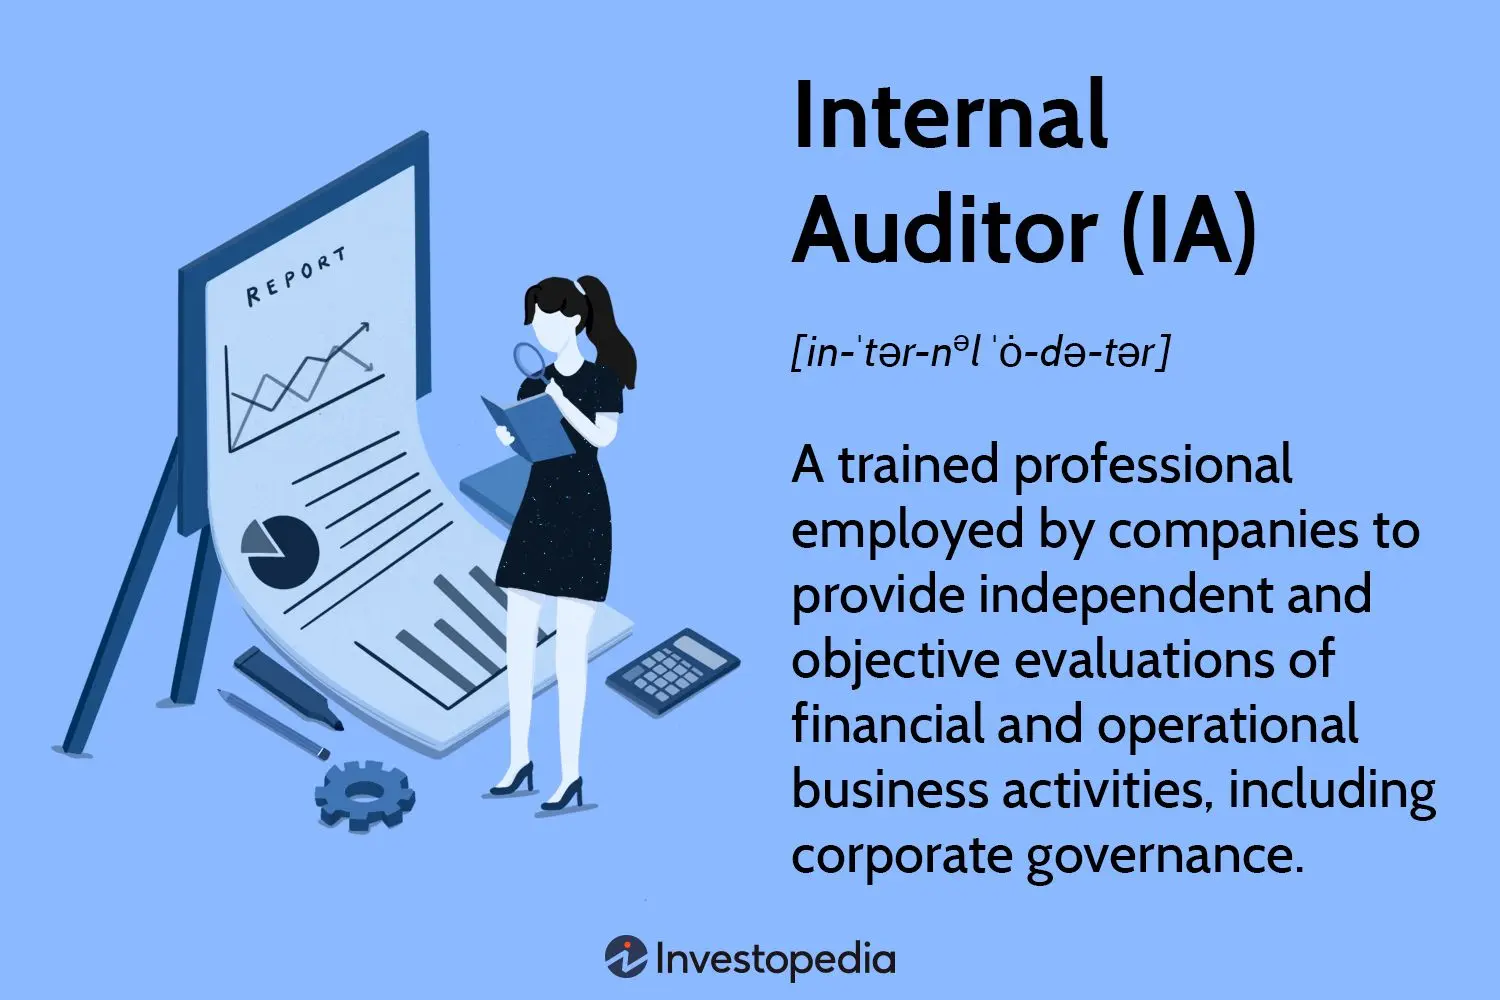 internal auditor responsibilities - What are the duties and responsibilities of internal audit